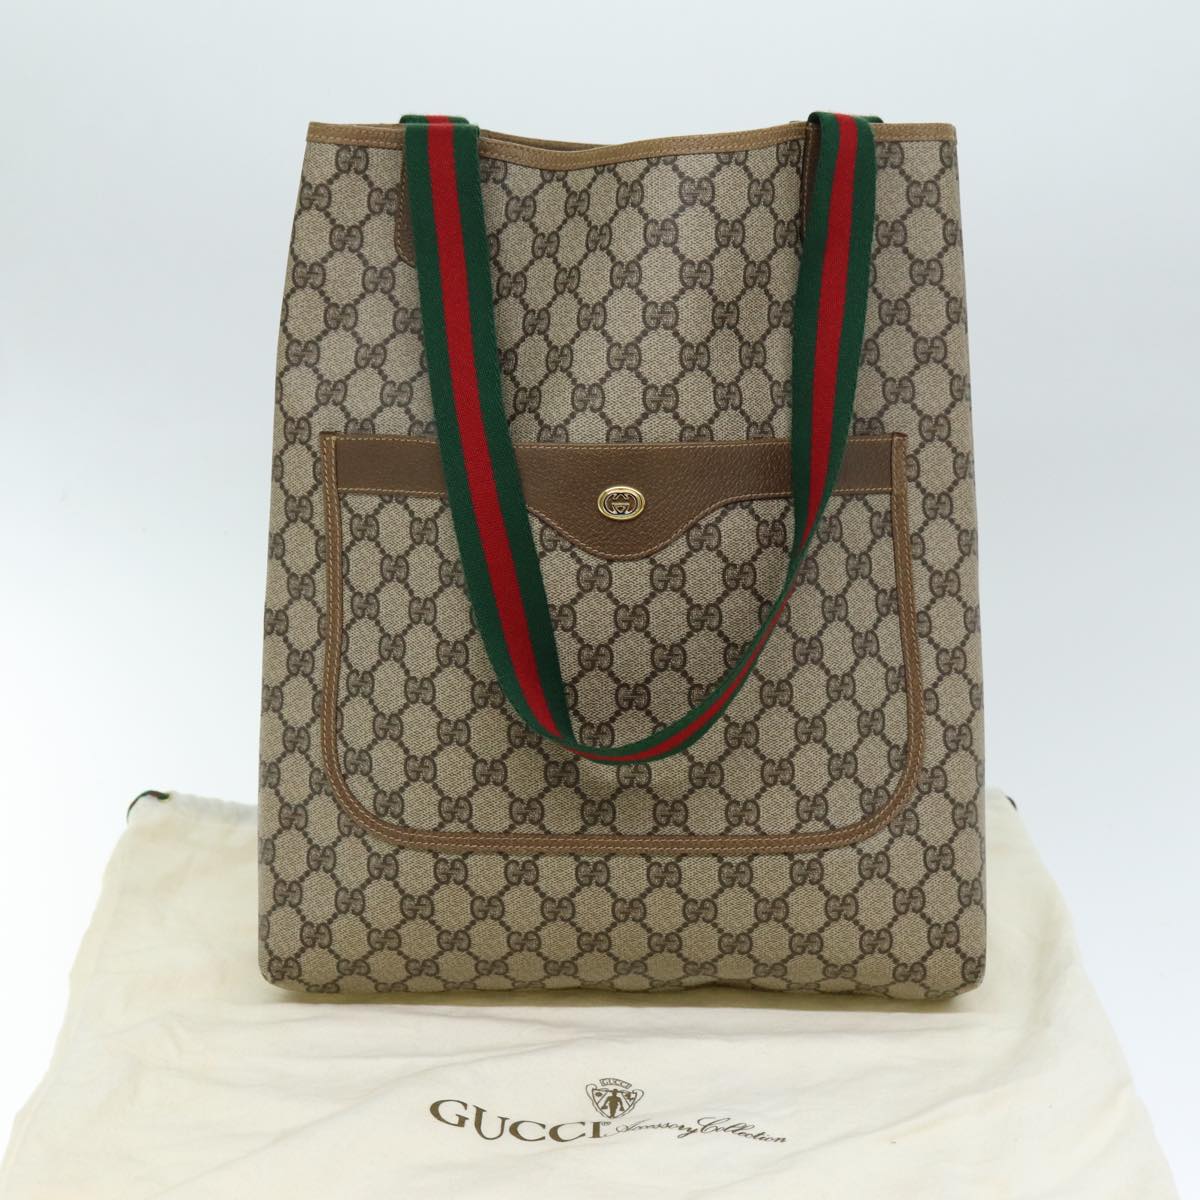 GUCCI GG Supreme Web Sherry Line Tote Bag PVC Beige Red 89 02 003 Auth yk12548